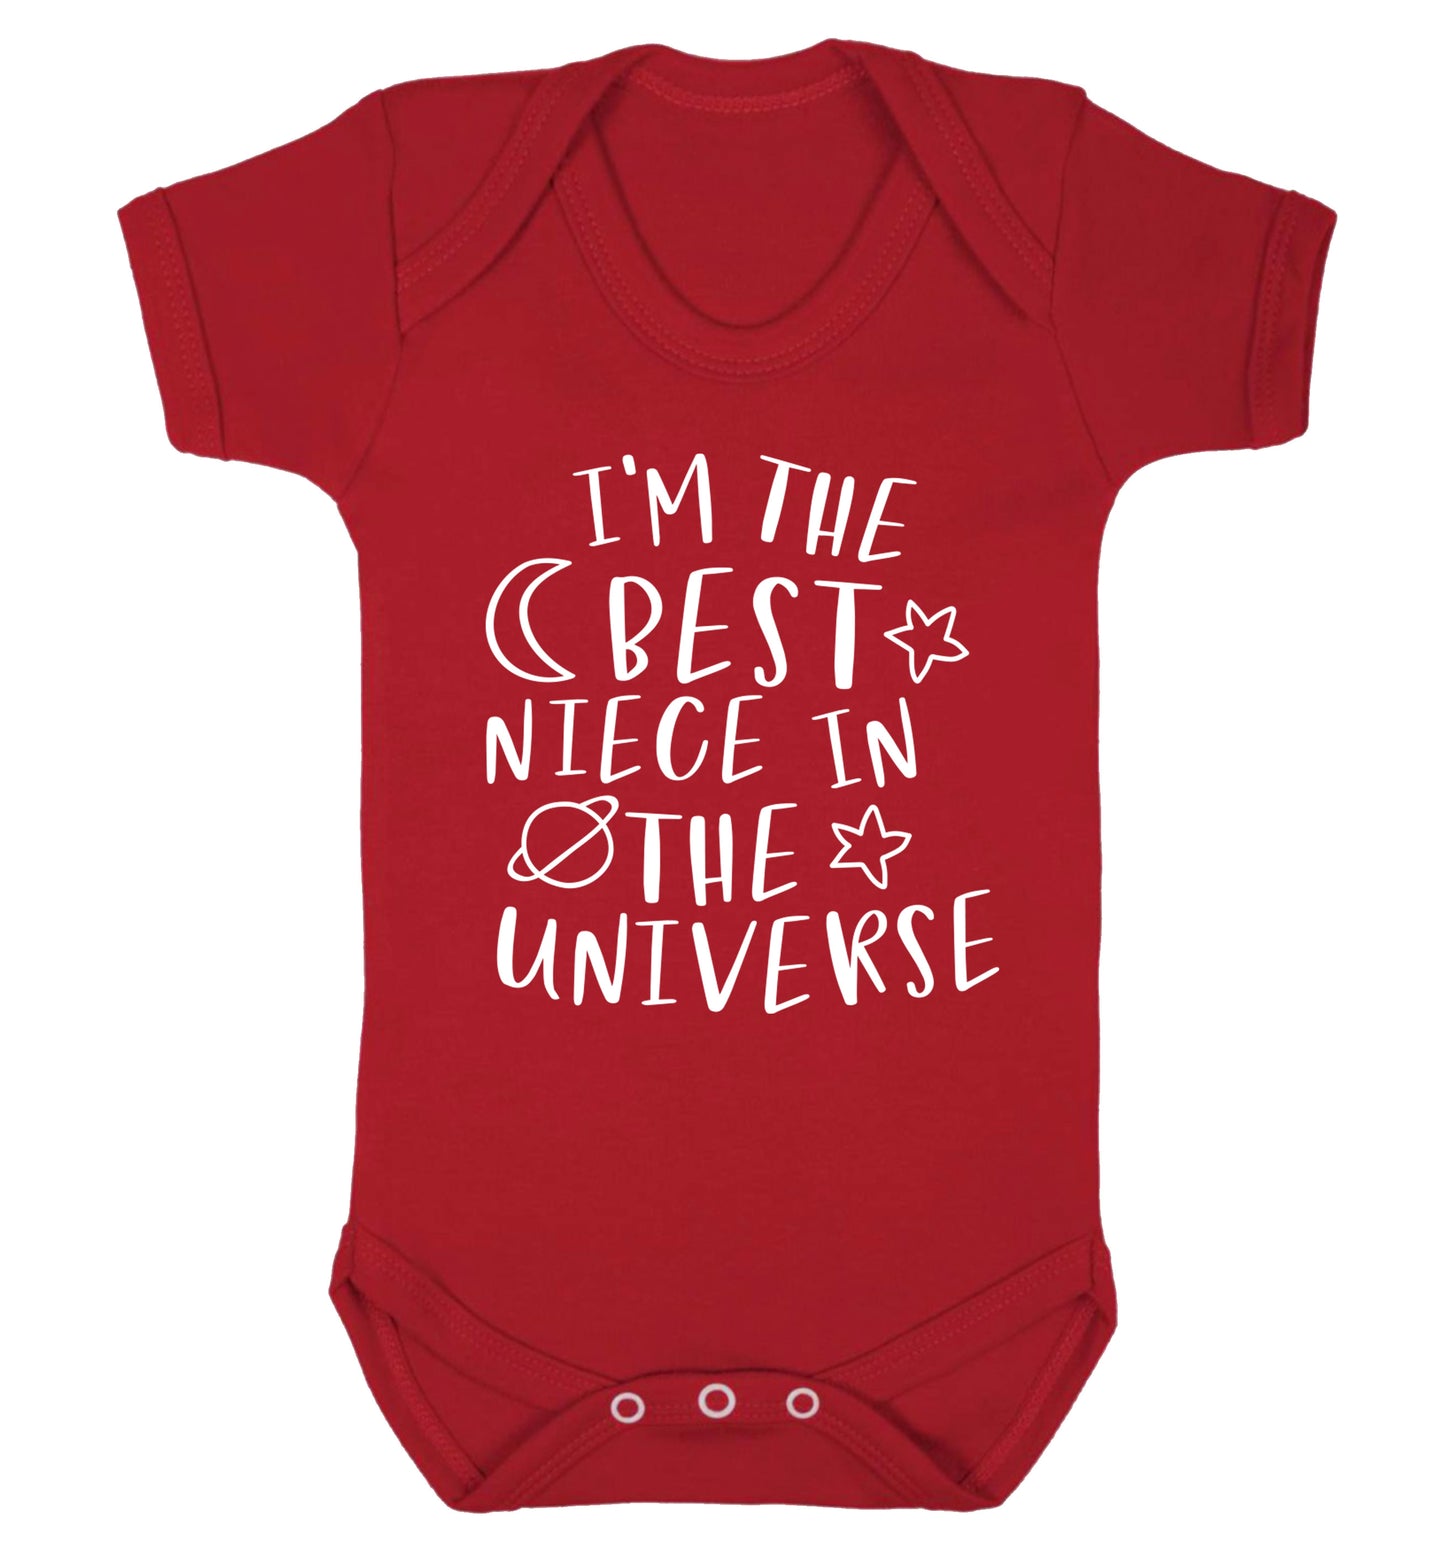 I'm the best niece in the universe Baby Vest red 18-24 months